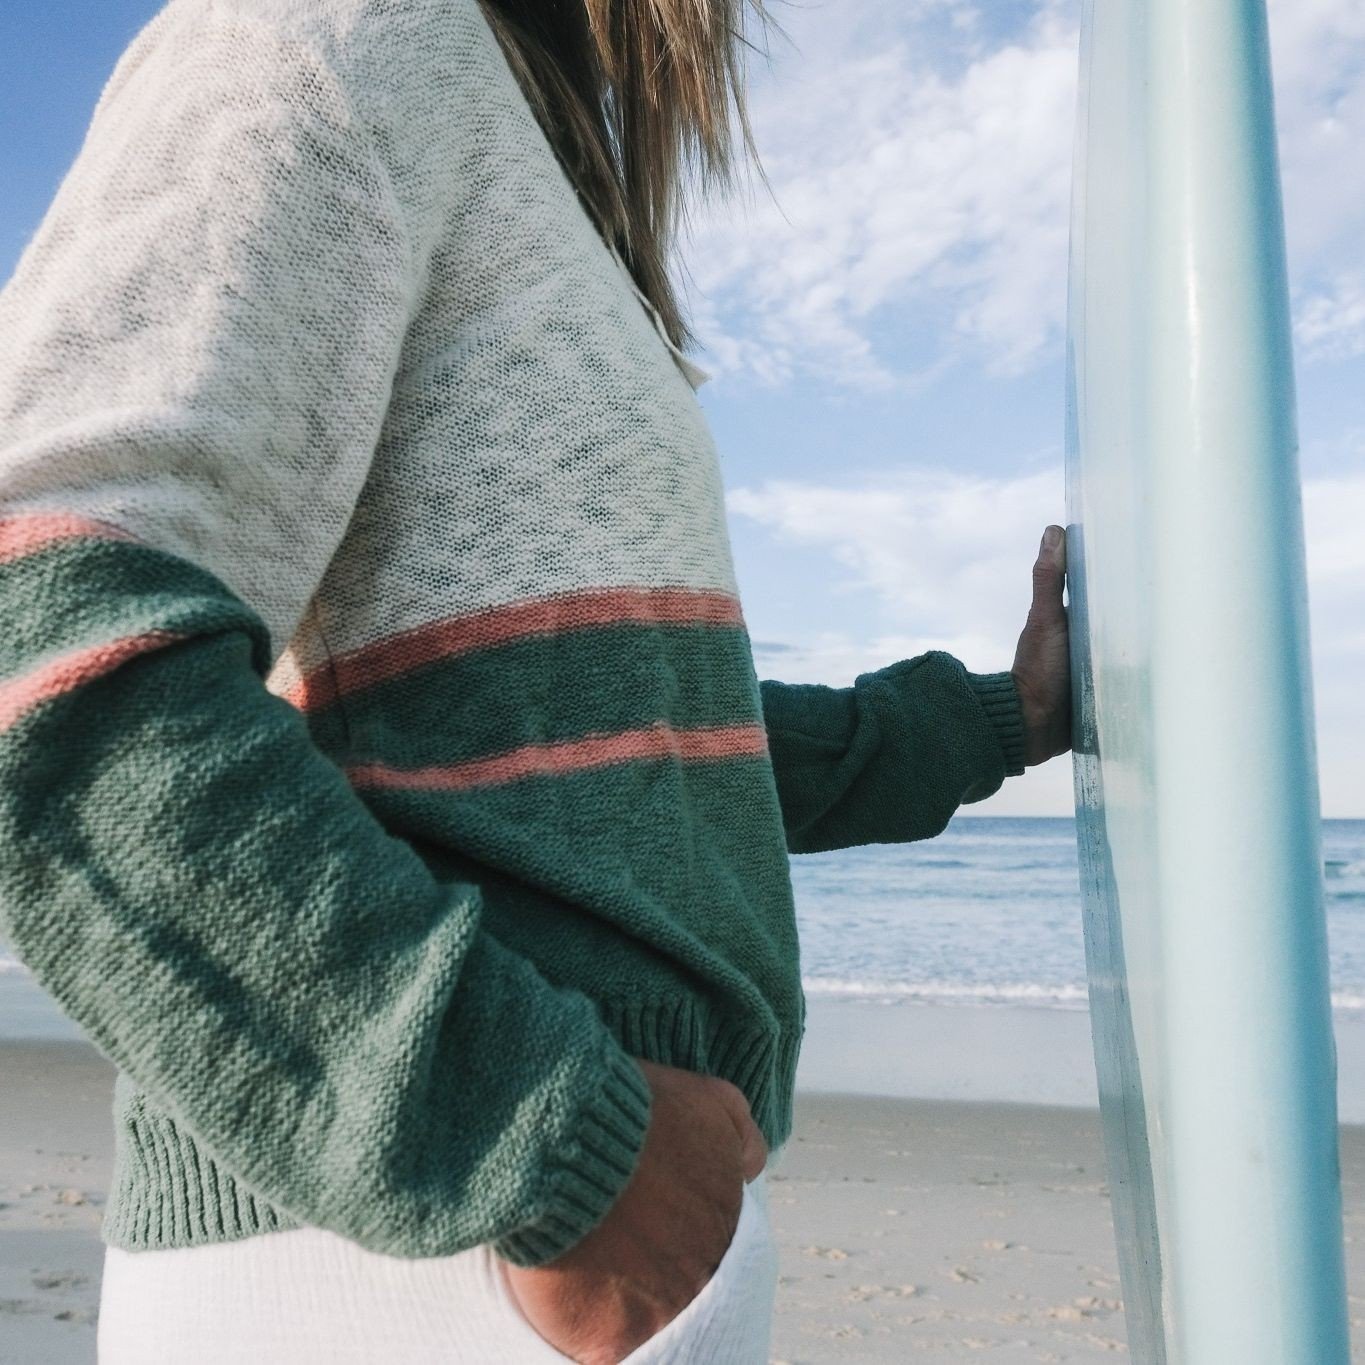 A casual wander to check if the waves are good!⁠
⁠
Wearing our cream and sage hoodie with coral stripe. Feeling good in this natural fibre knit. It's giving breathable comfort whatever the weather⁠.⁠
⁠
⁠
⁠
#forcleanoceans #pipinghotaustralia #availab